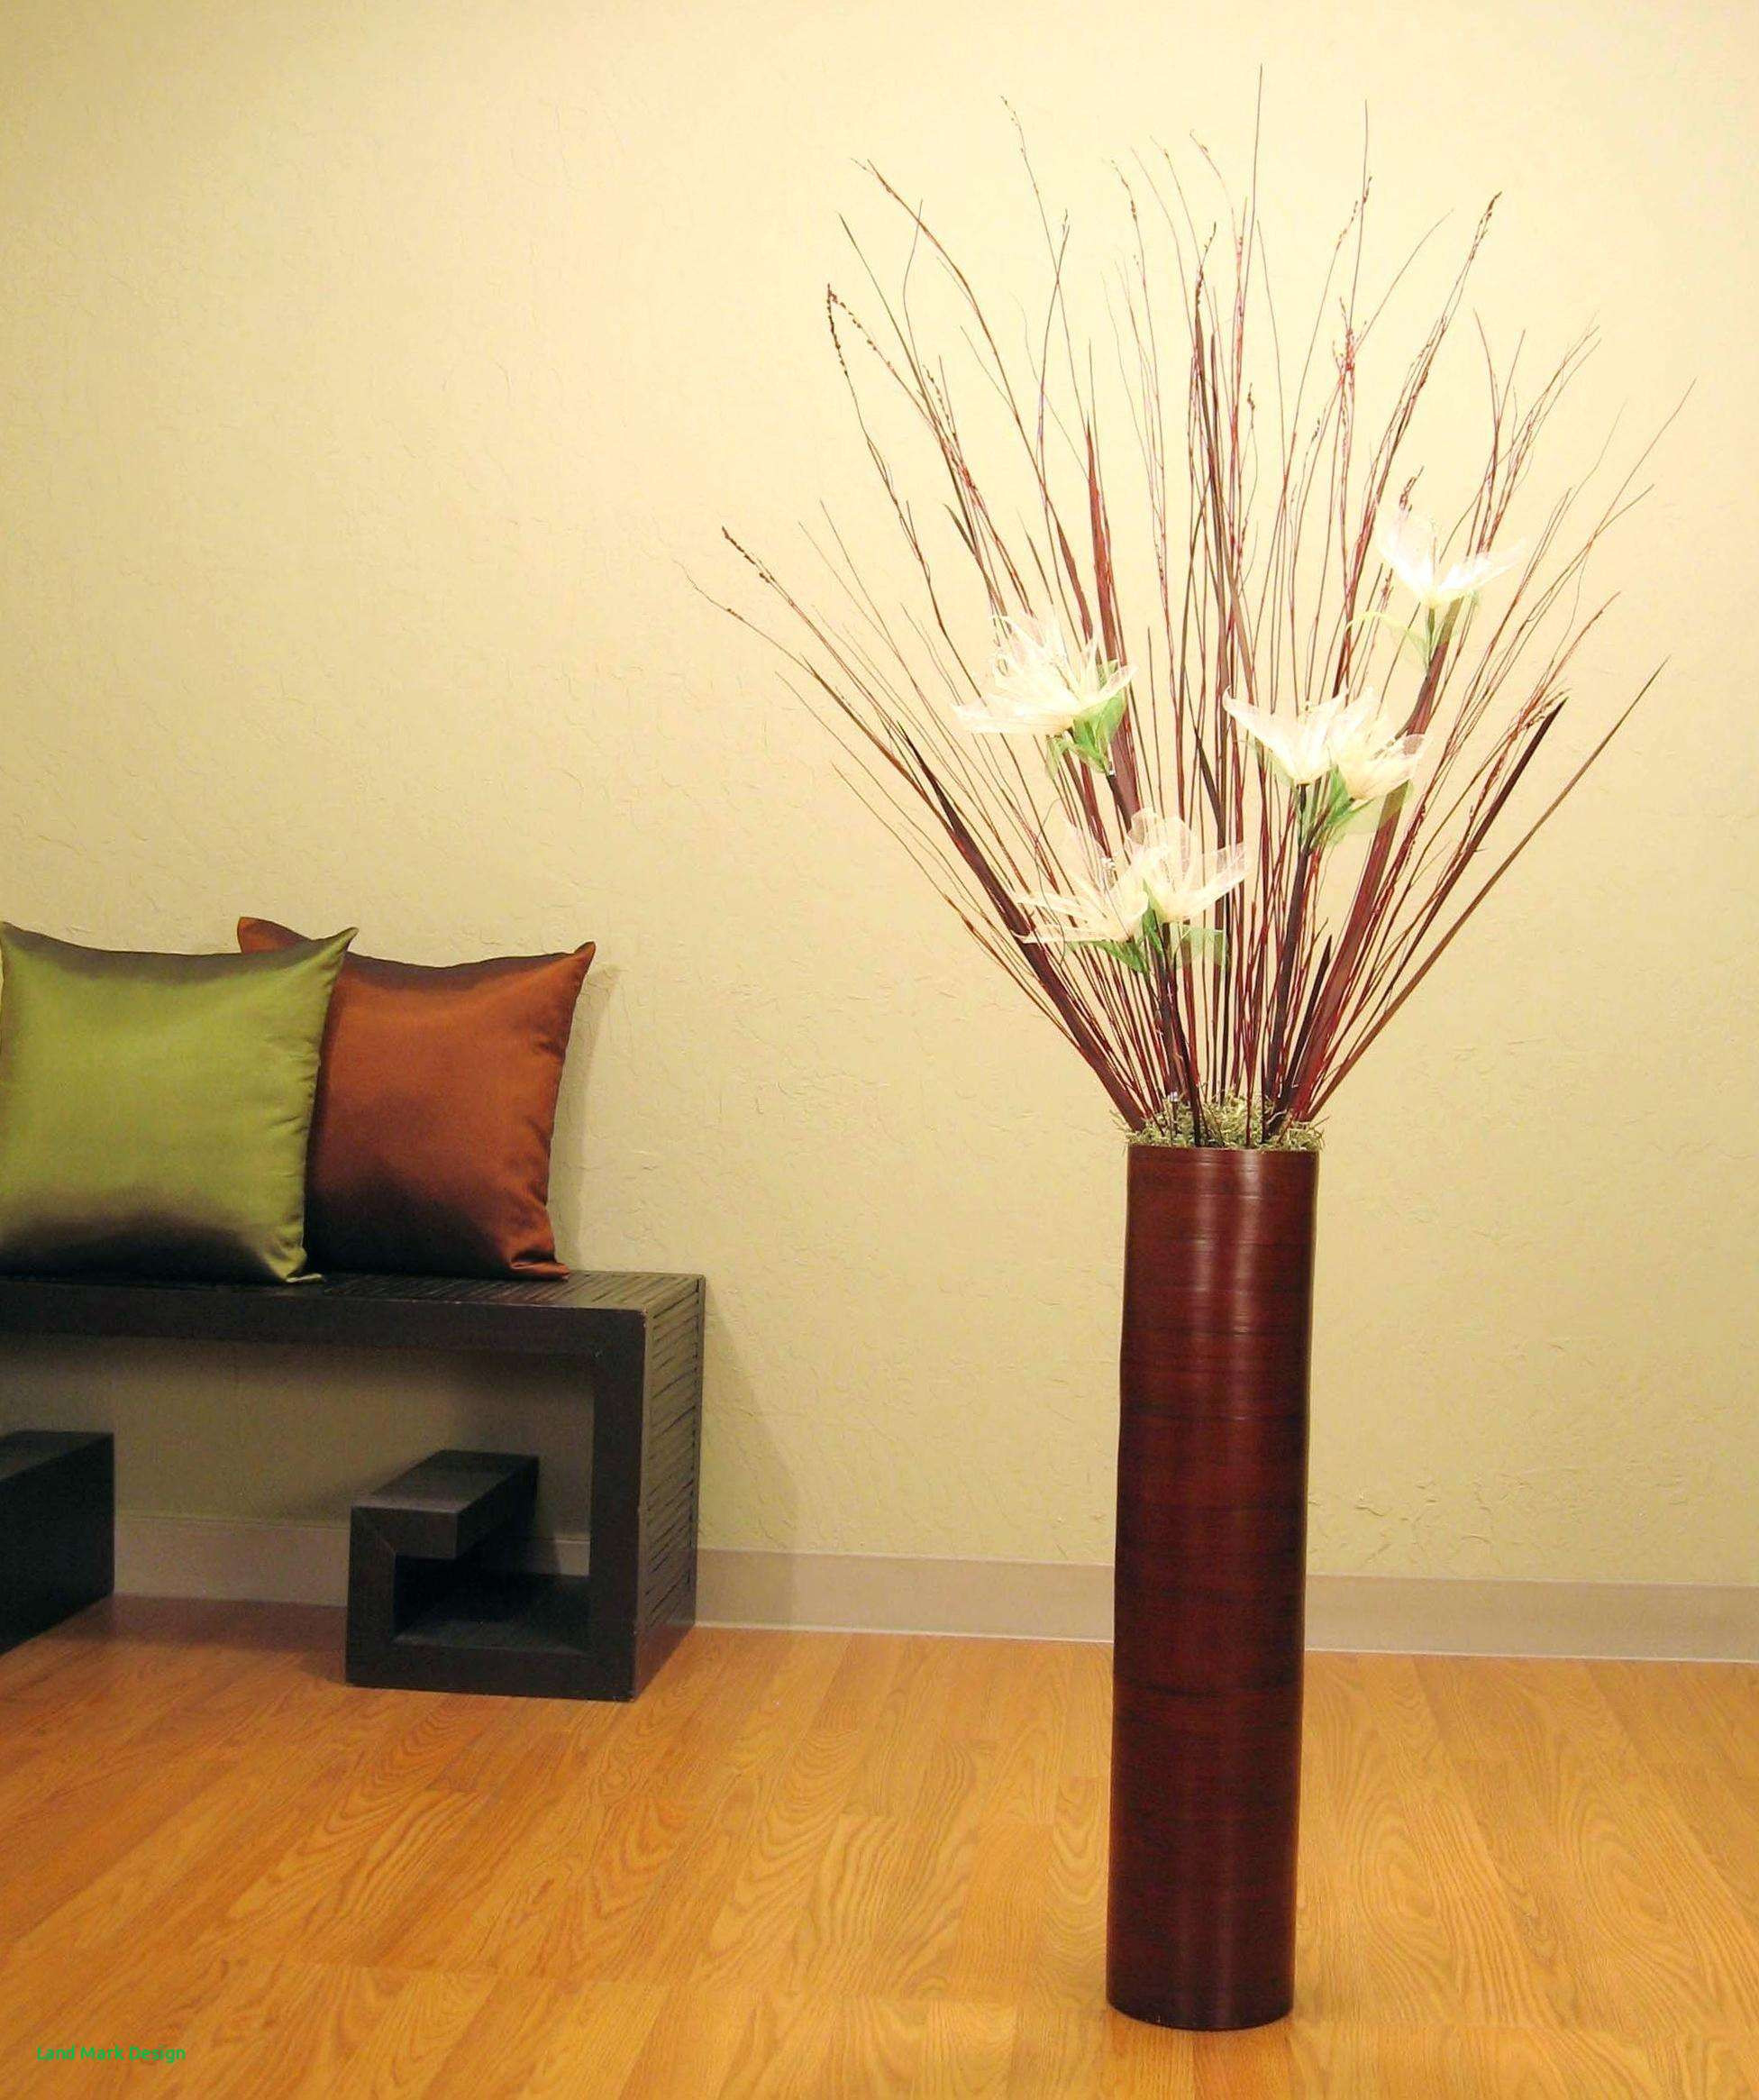 21 Nice 36 Inch Bamboo Tall Floor Vase 2024 free download 36 inch bamboo tall floor vase of about bamboo flooring home decor home design intended for full size of living room bamboo vase awesome cheap floor standing vases image collections vases la